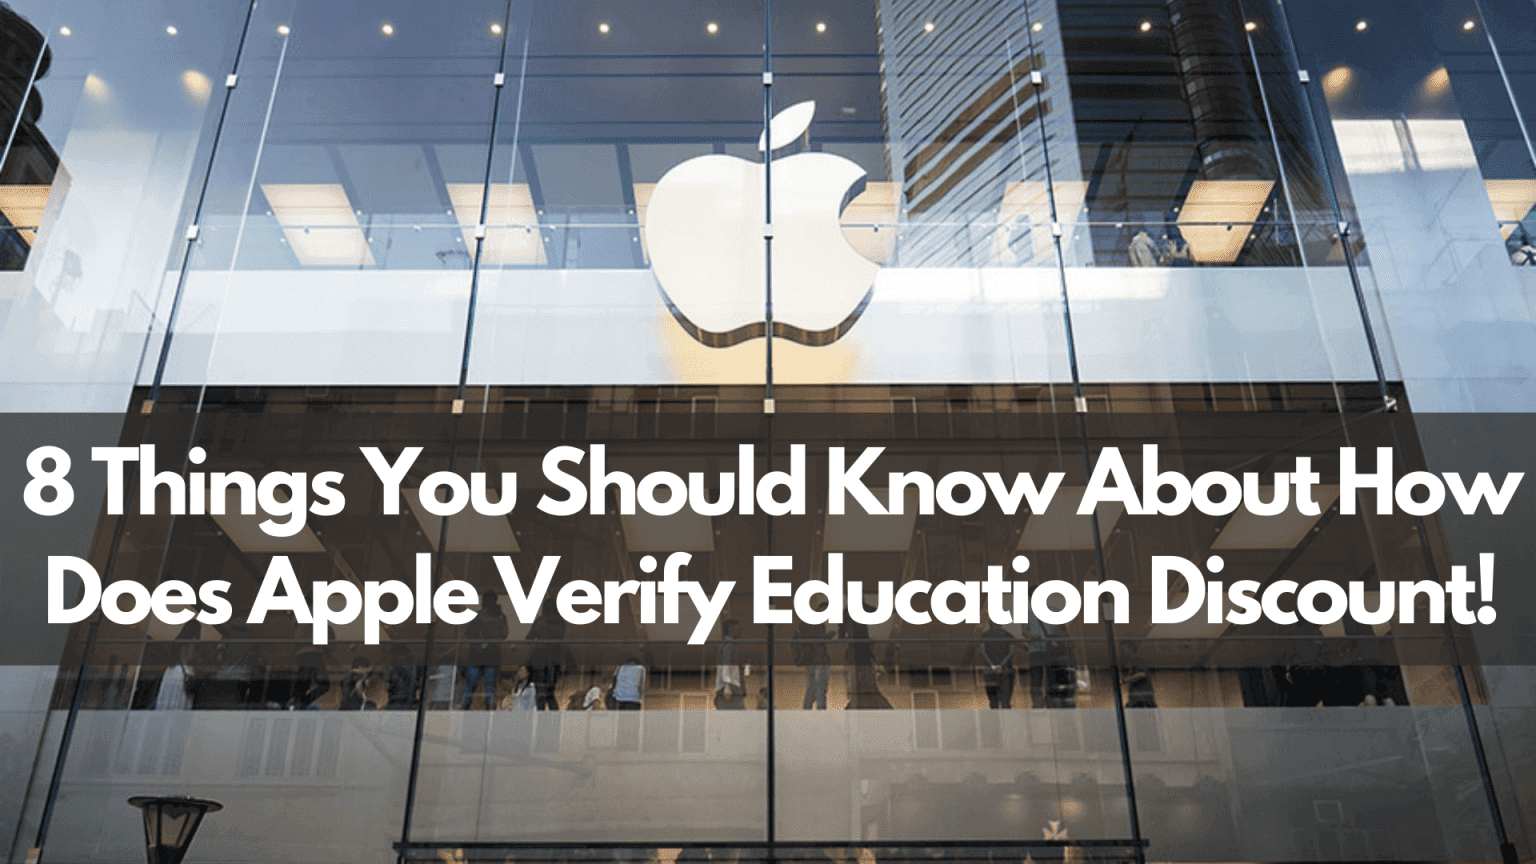 8 Things You Should Know About How Does Apple Verify Education Discount